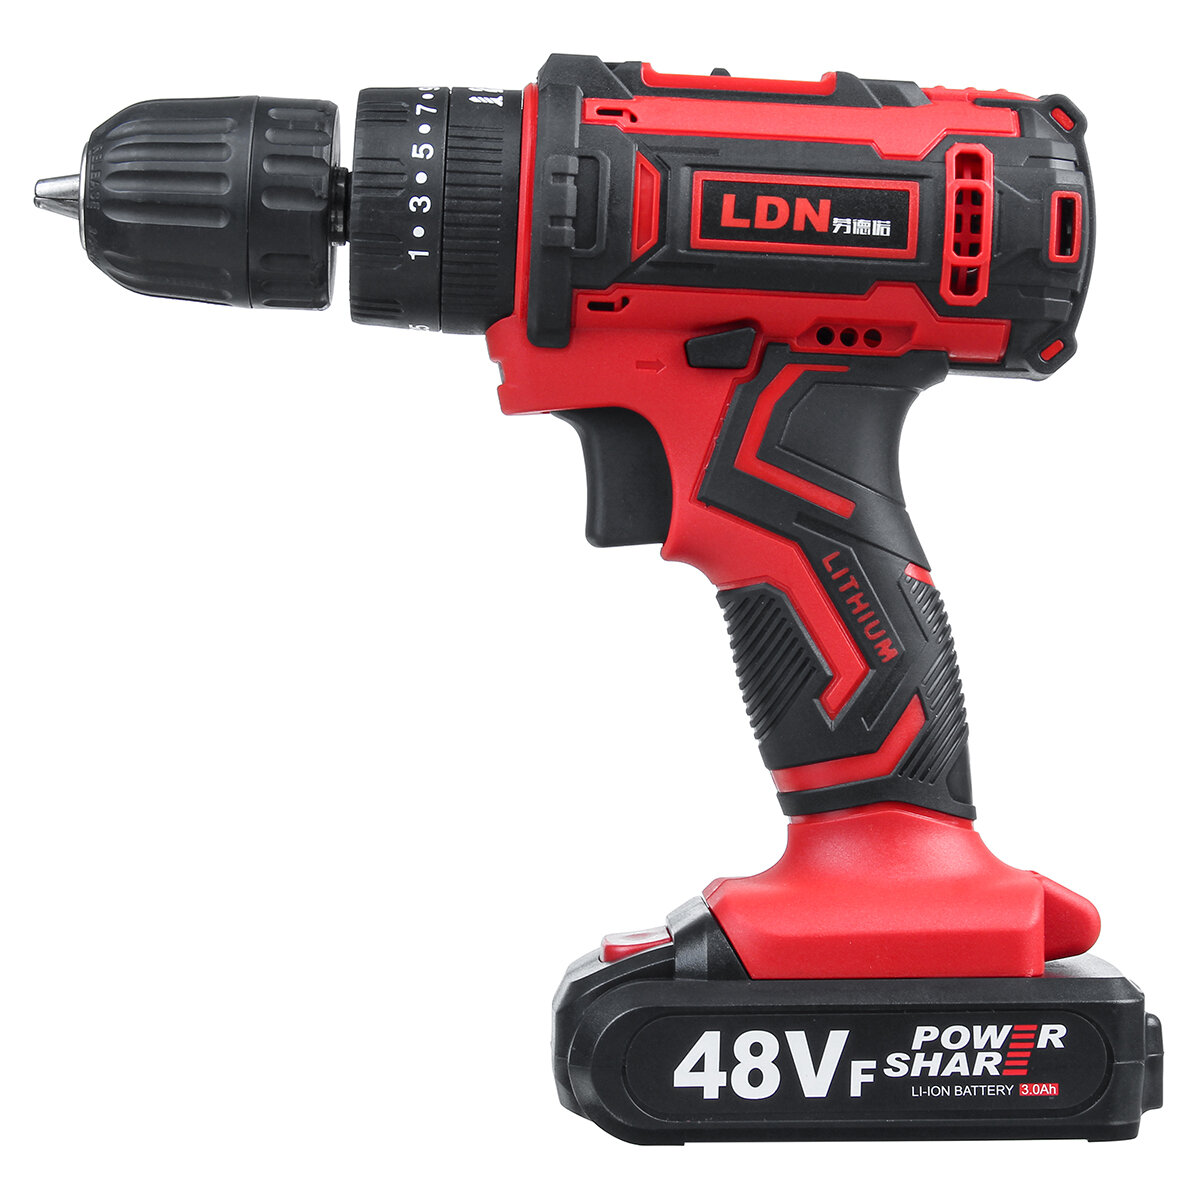 48VF Cordless Electric Impact Drill Rechargeable Drill Screwdriver W/ 1 or 2 Li-ion Battery COD